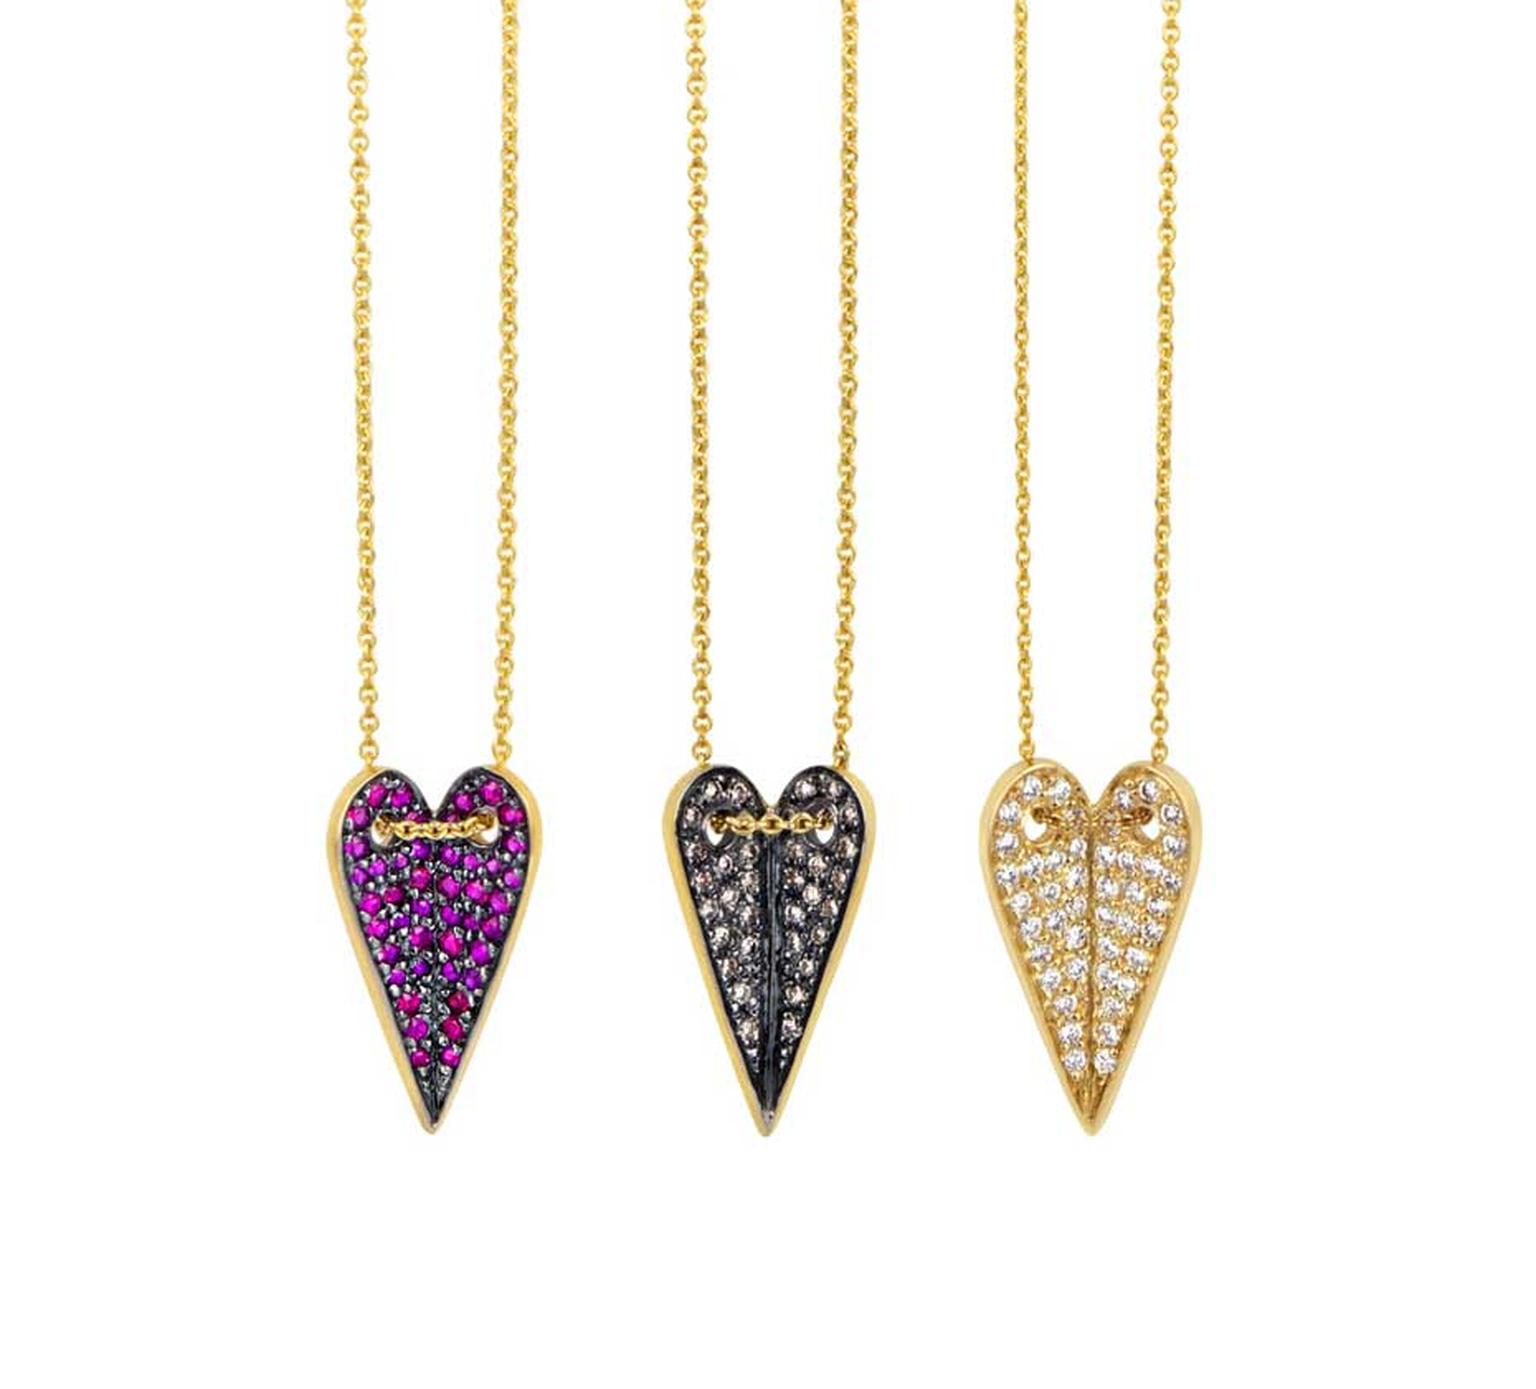 Elena Votsi Heart necklaces with sapphires, black diamonds and white diamonds, from the Eros collection.